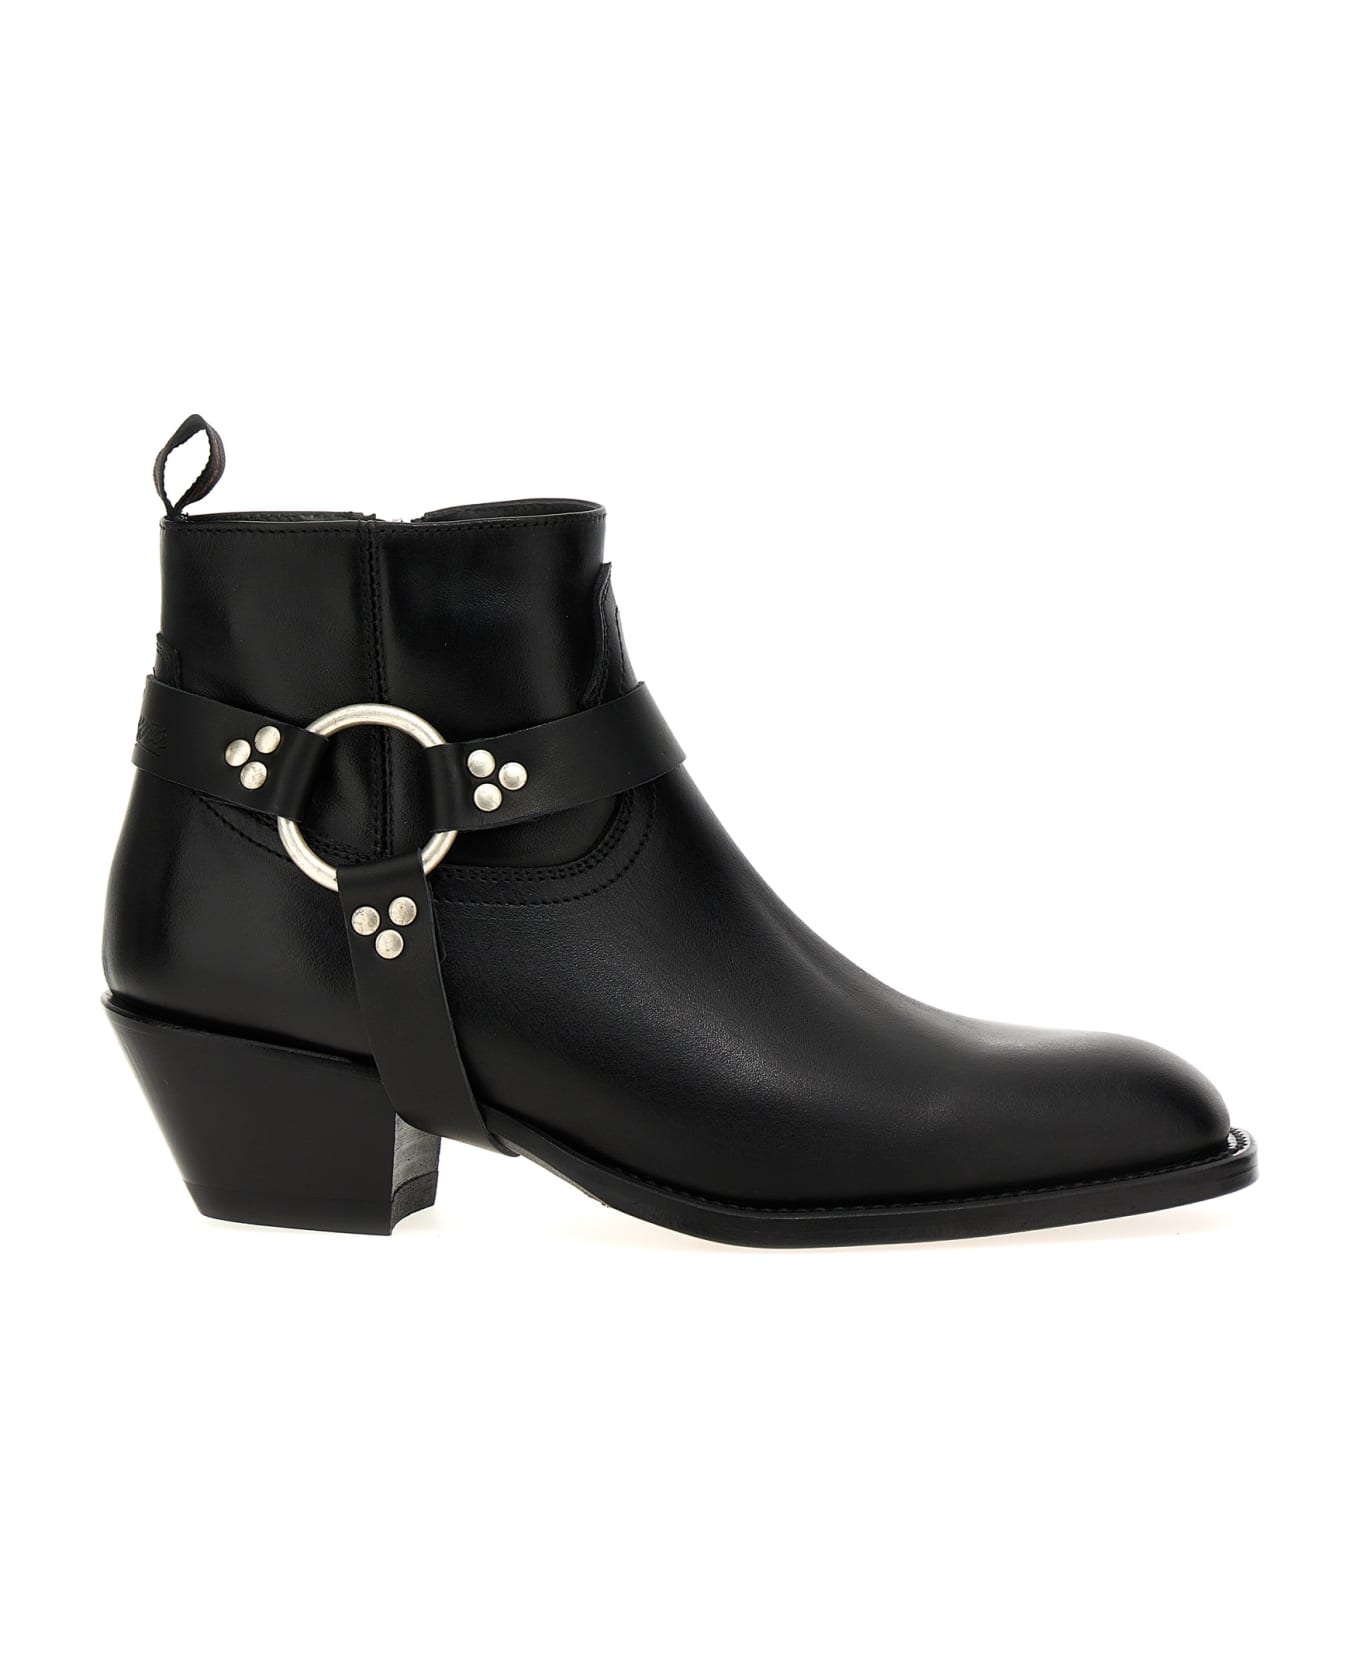 Sonora 'dulce Belt' Ankle Boots - Black   ブーツ